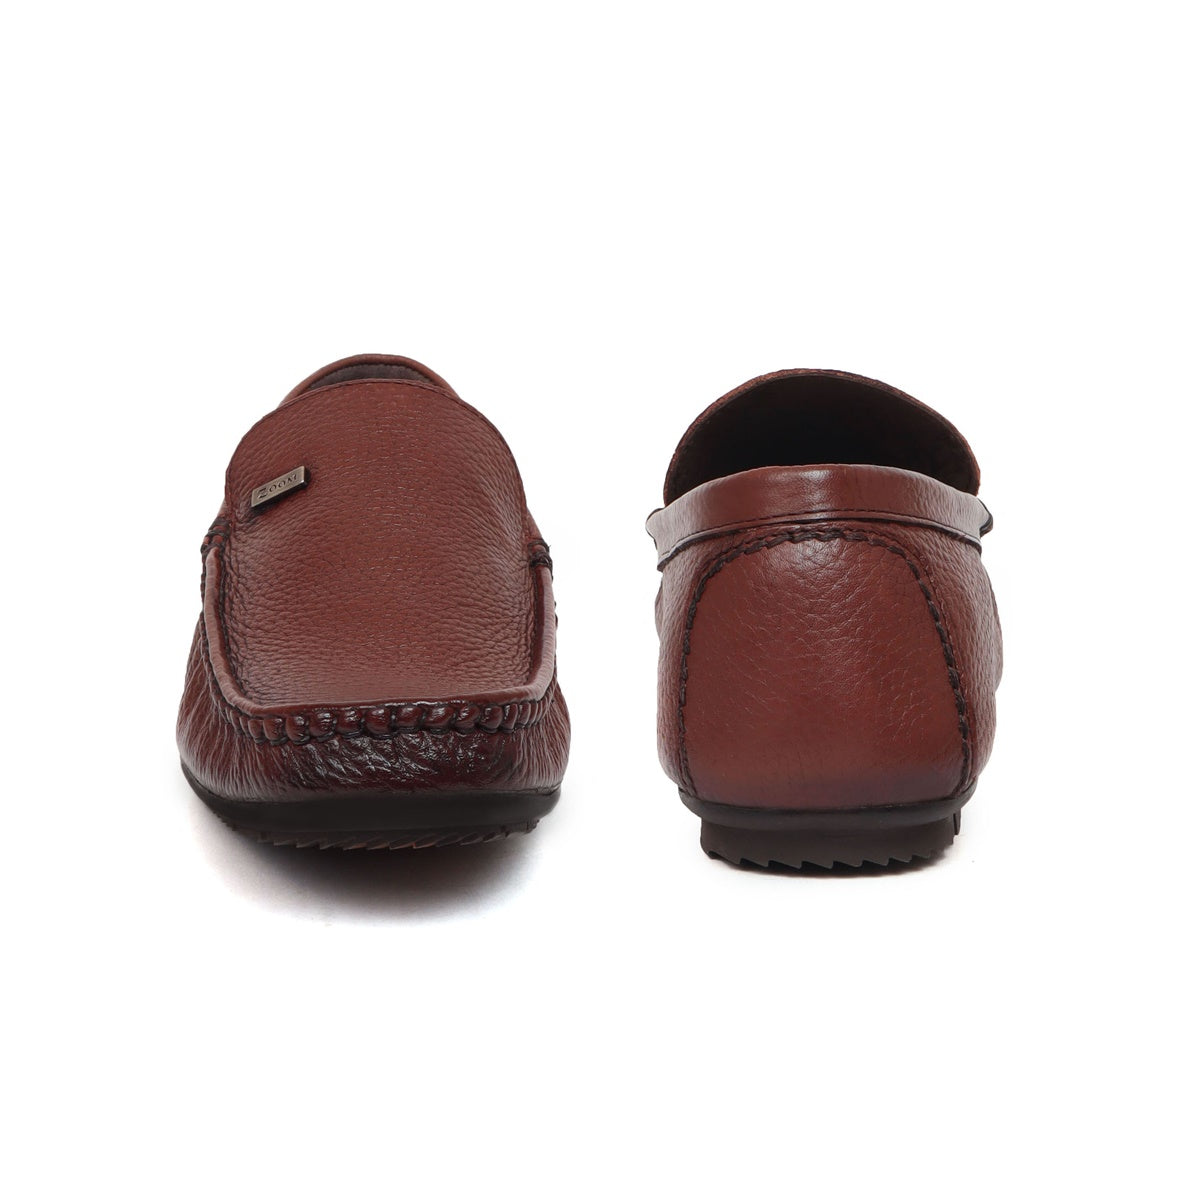 casual brown loafers for men bt-16_2